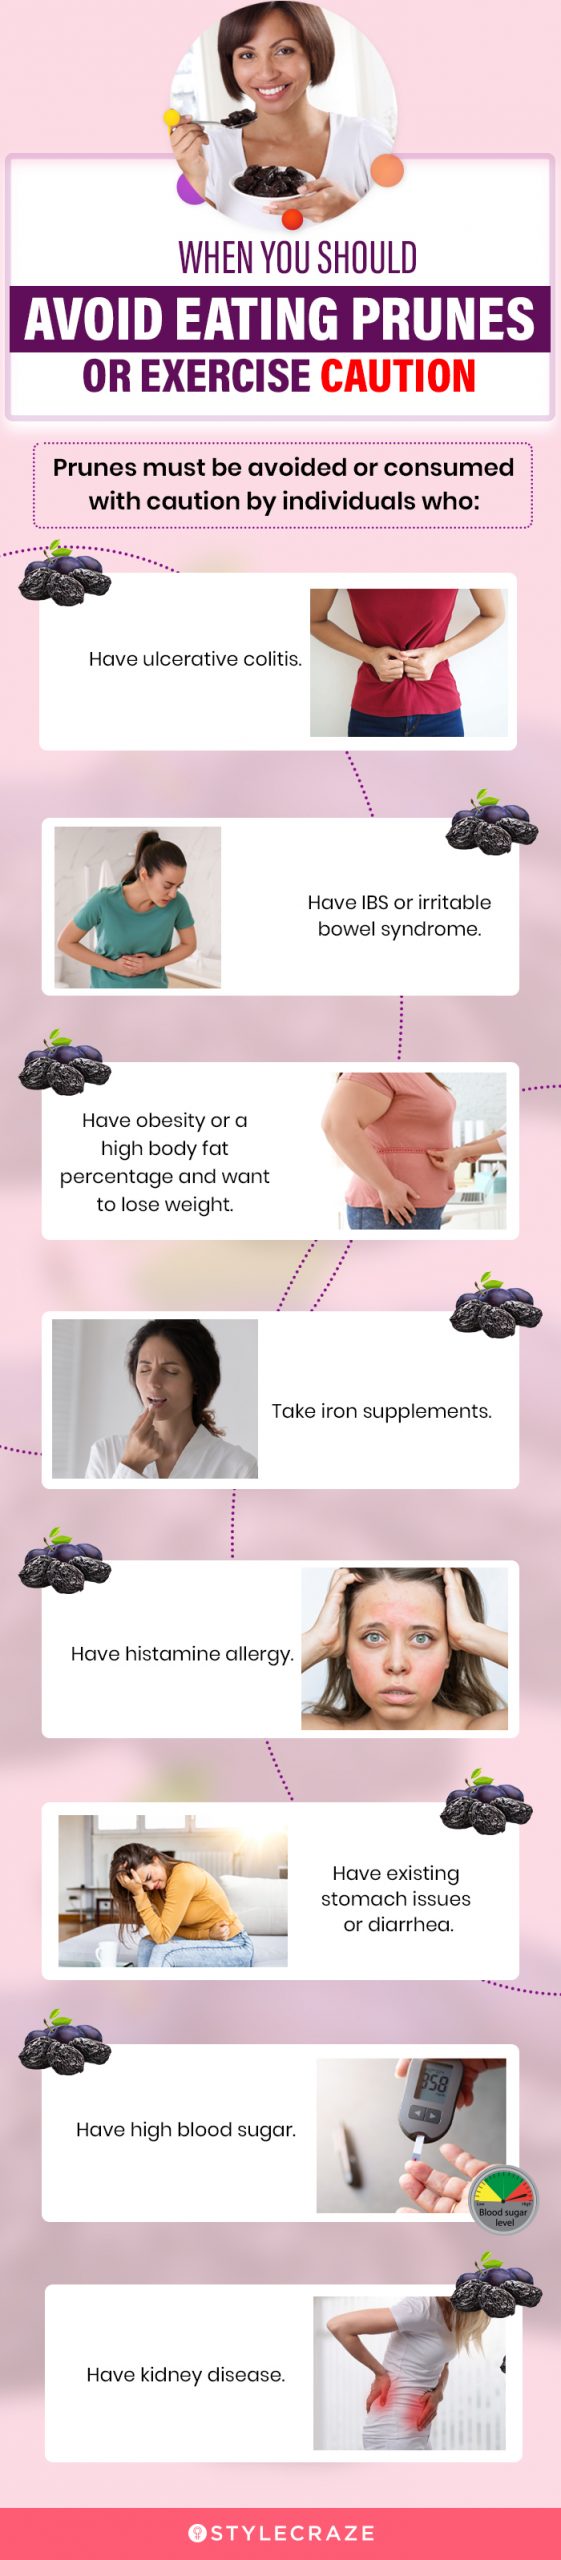 when you should avoid eating prunes or exercise [infographic]